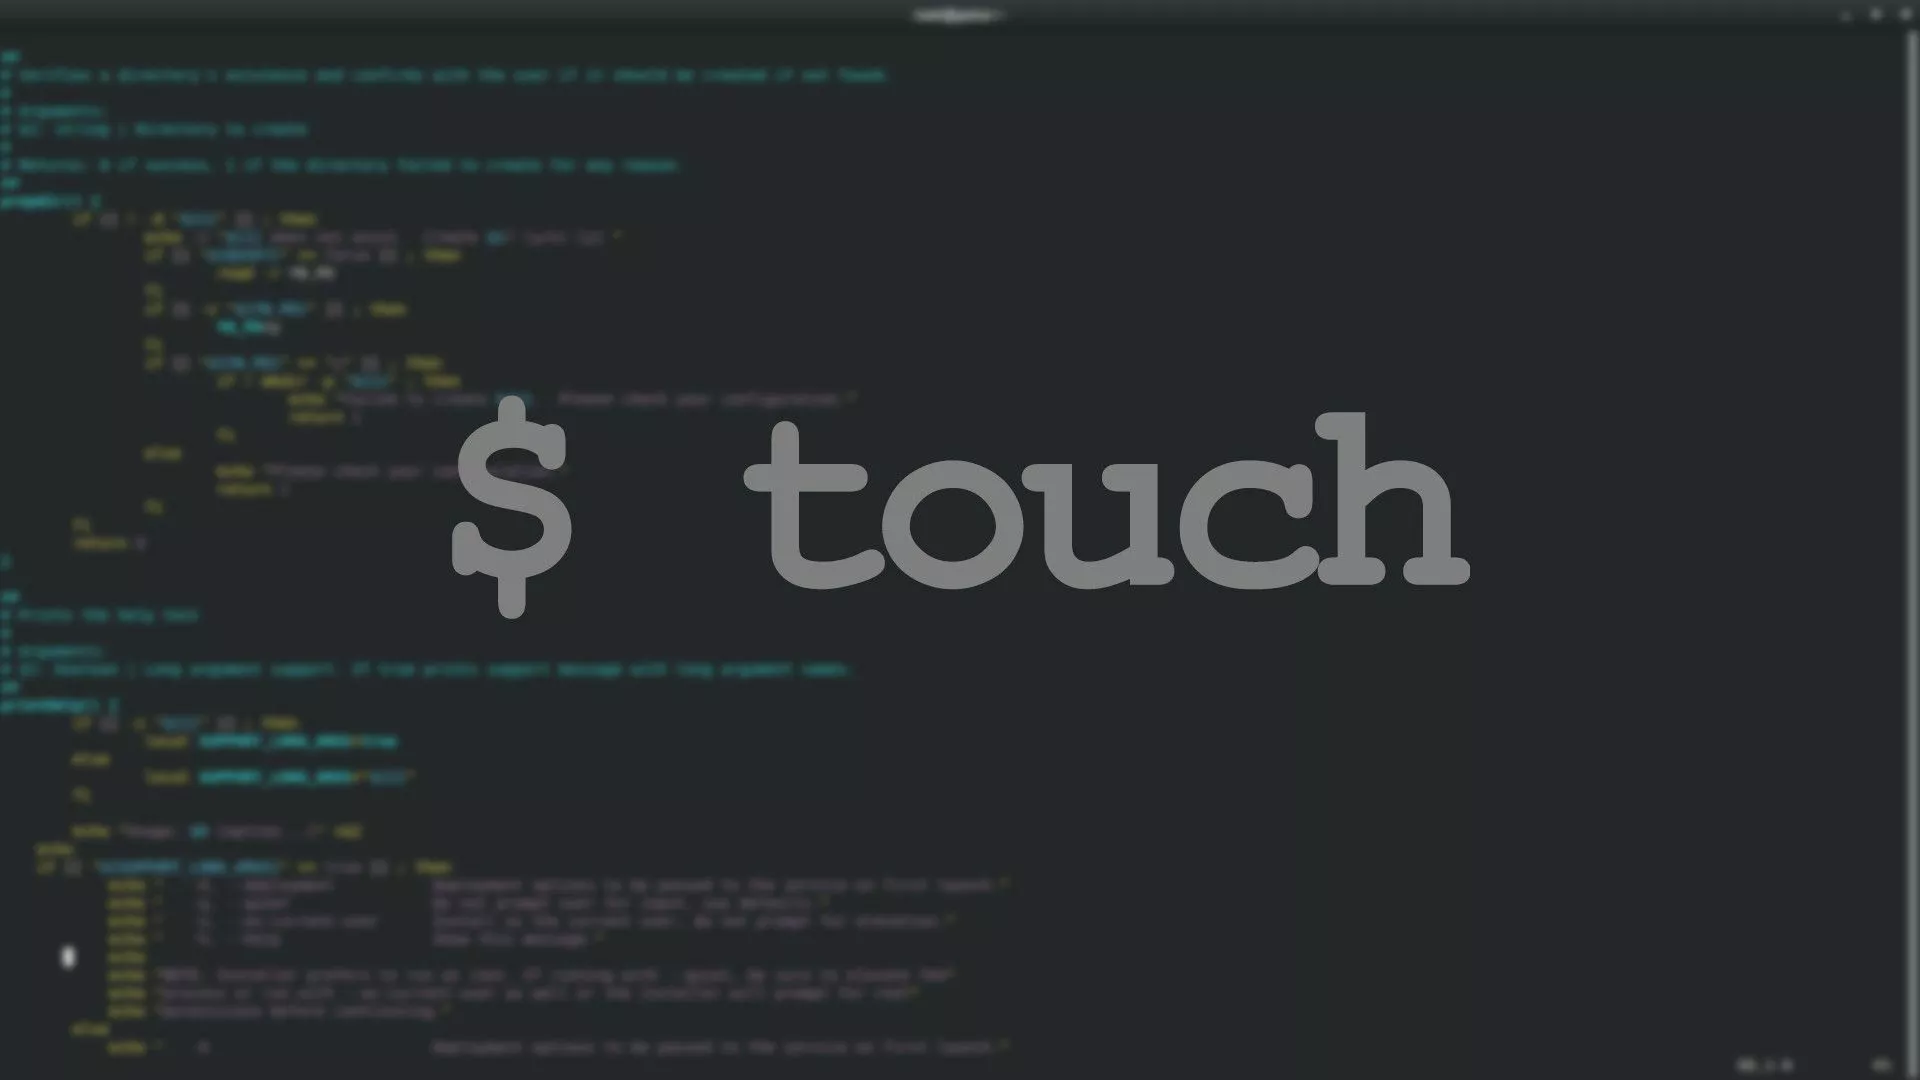 Linux touch 命令创建修改文件时间戳